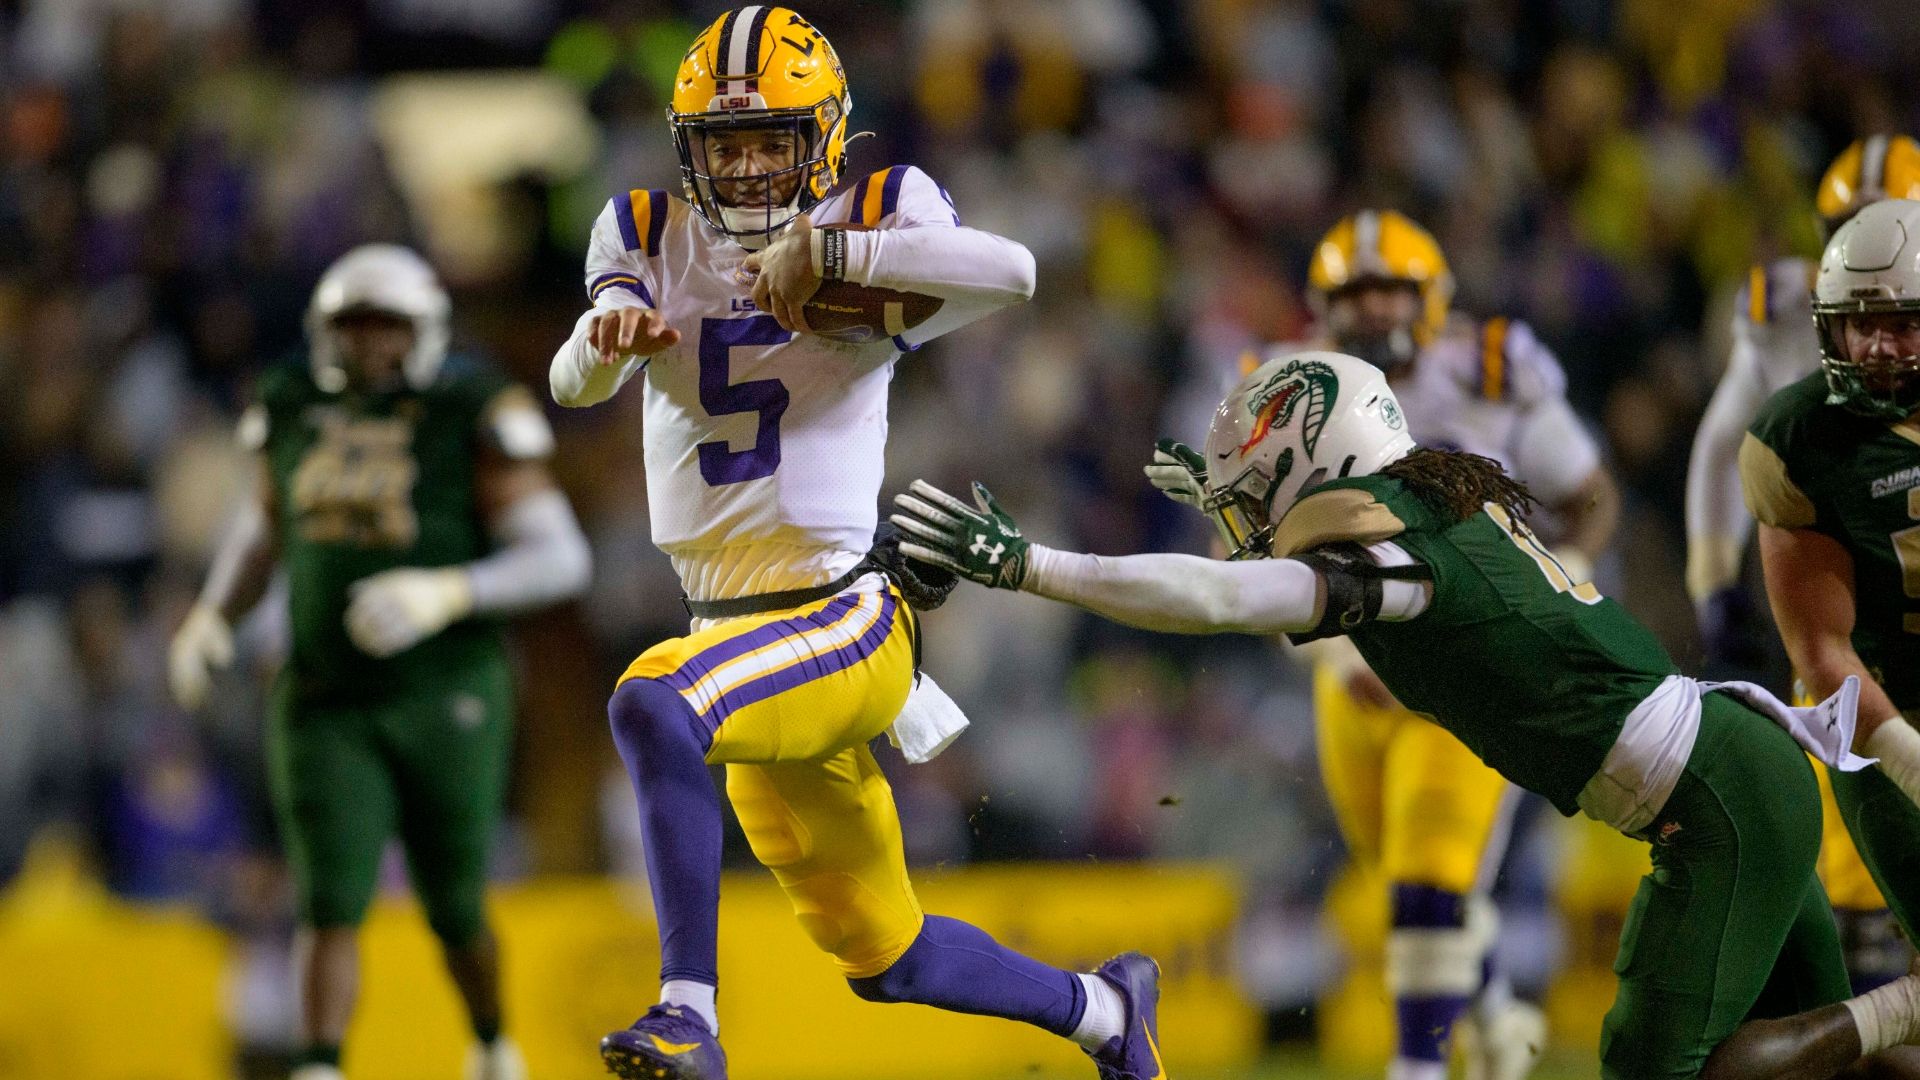 LSU needs to be consistent on offense vs. Aggies